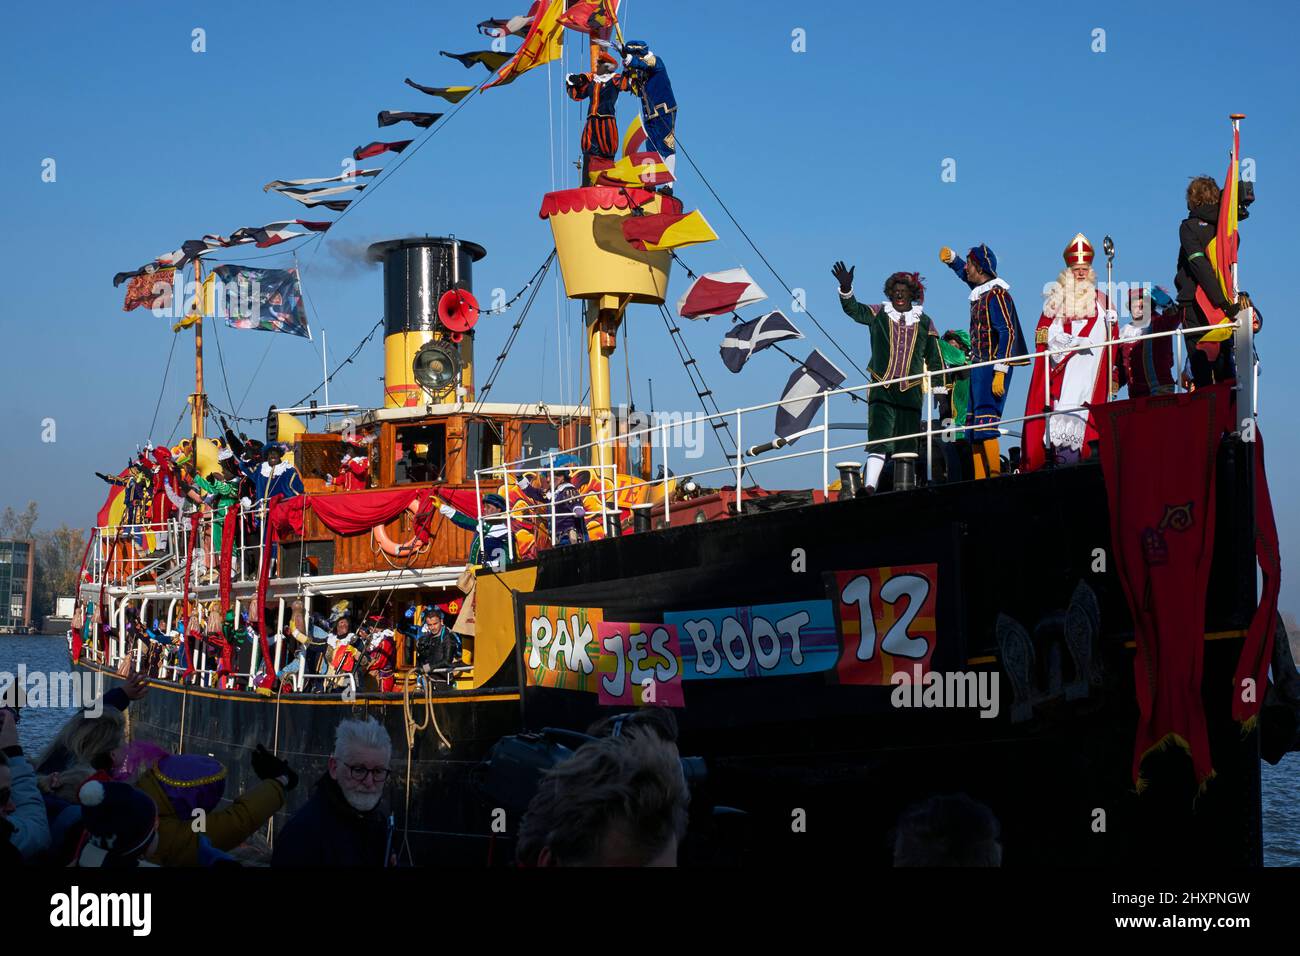 The boat in which St. Nicholas and his assistants arrives in the city Zaandam Stock Photo